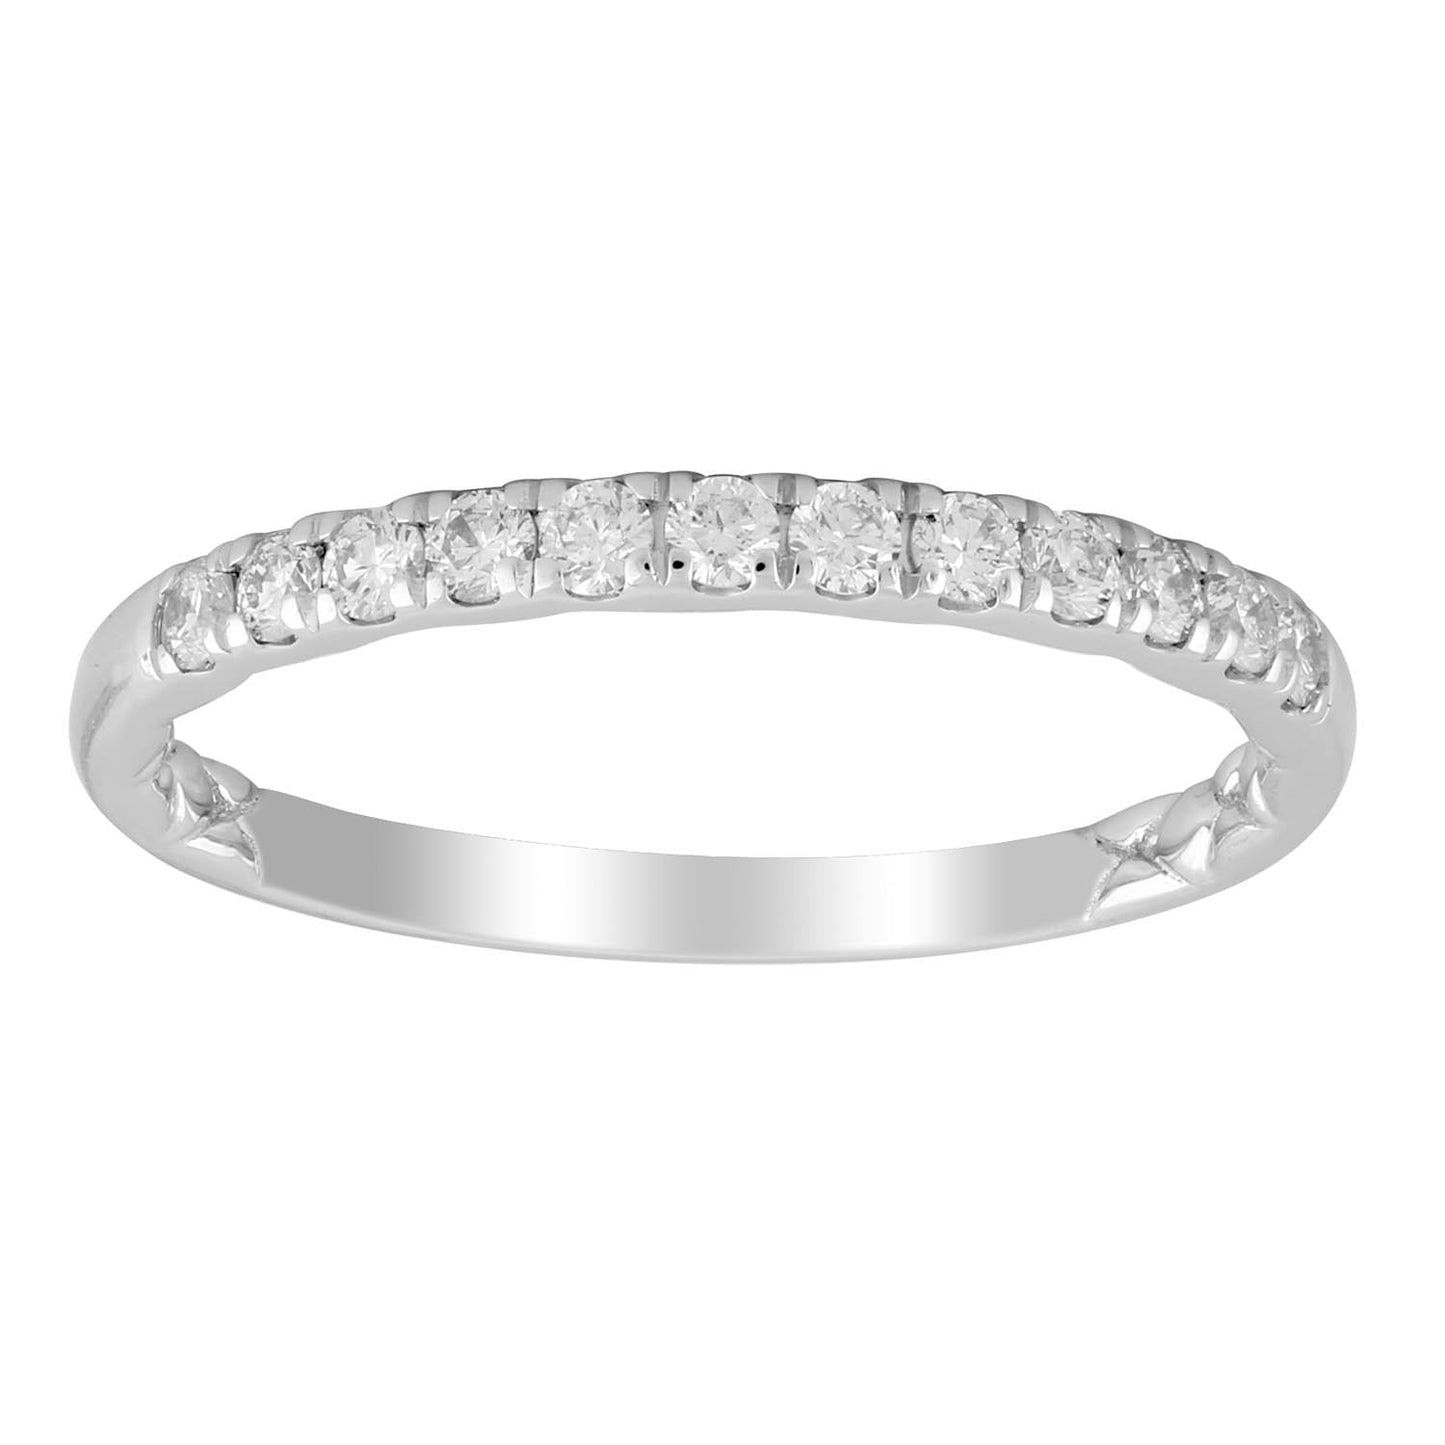 Diamond Band Ring with 0.25ct Diamonds in 18K White Gold